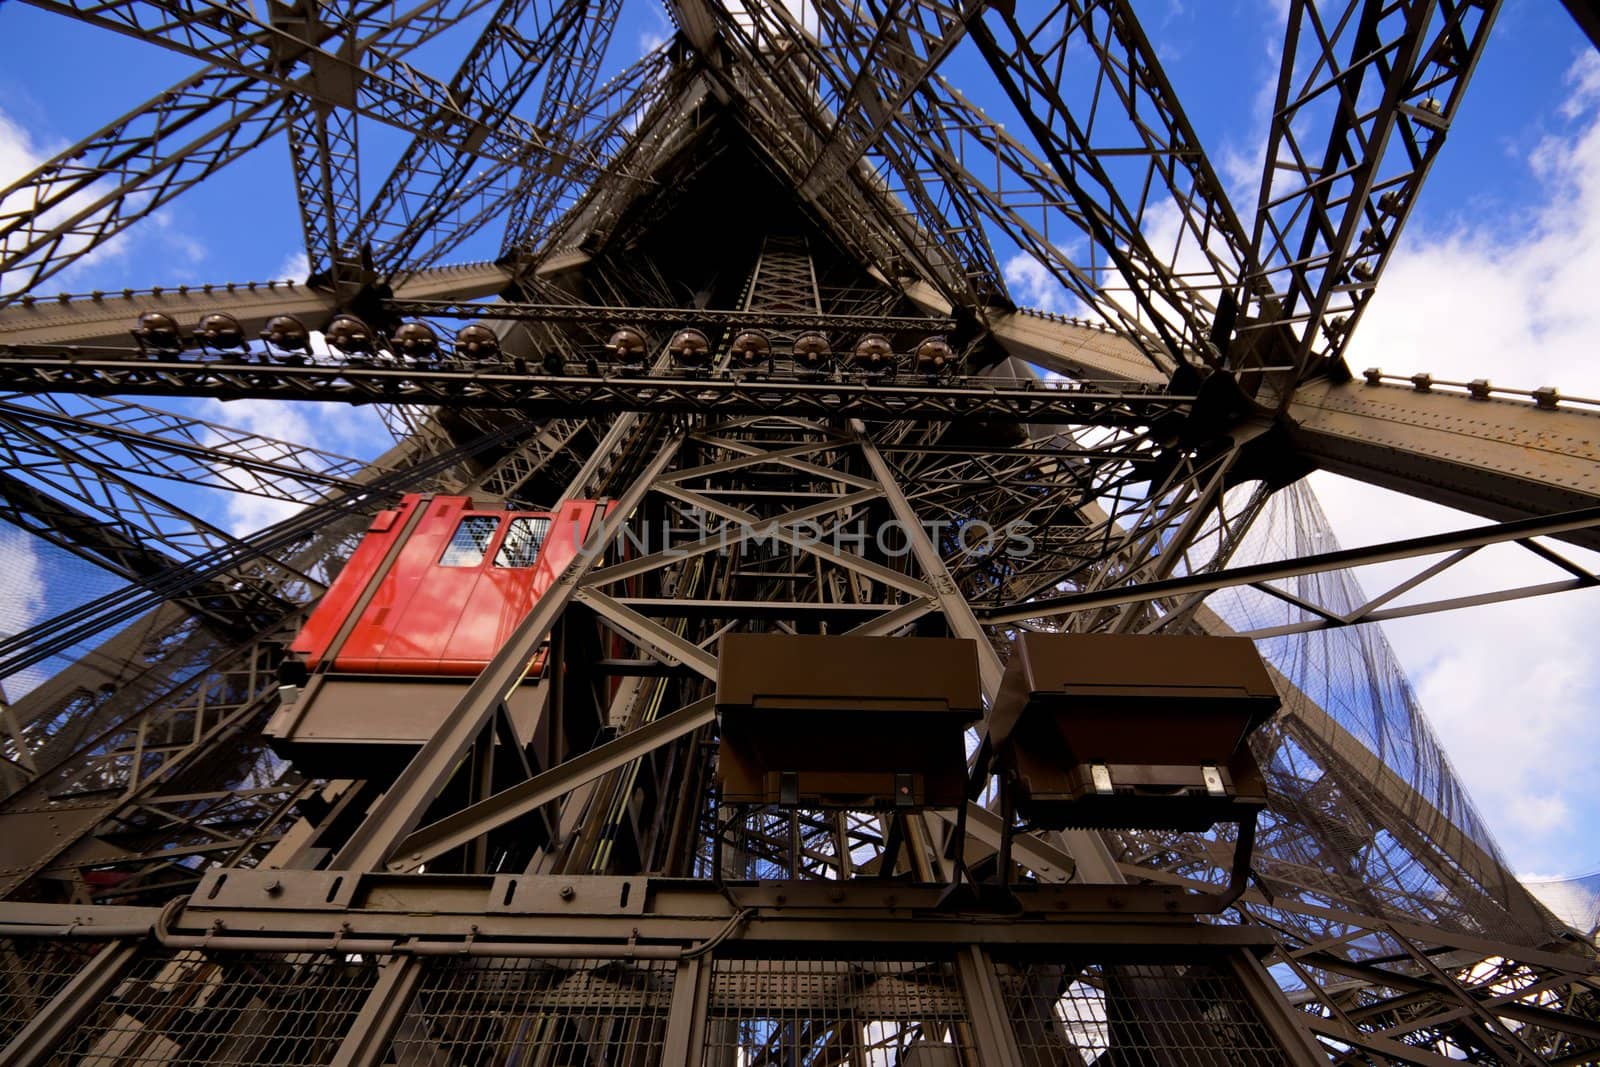 Bottom view of lift on Eiffel Tower